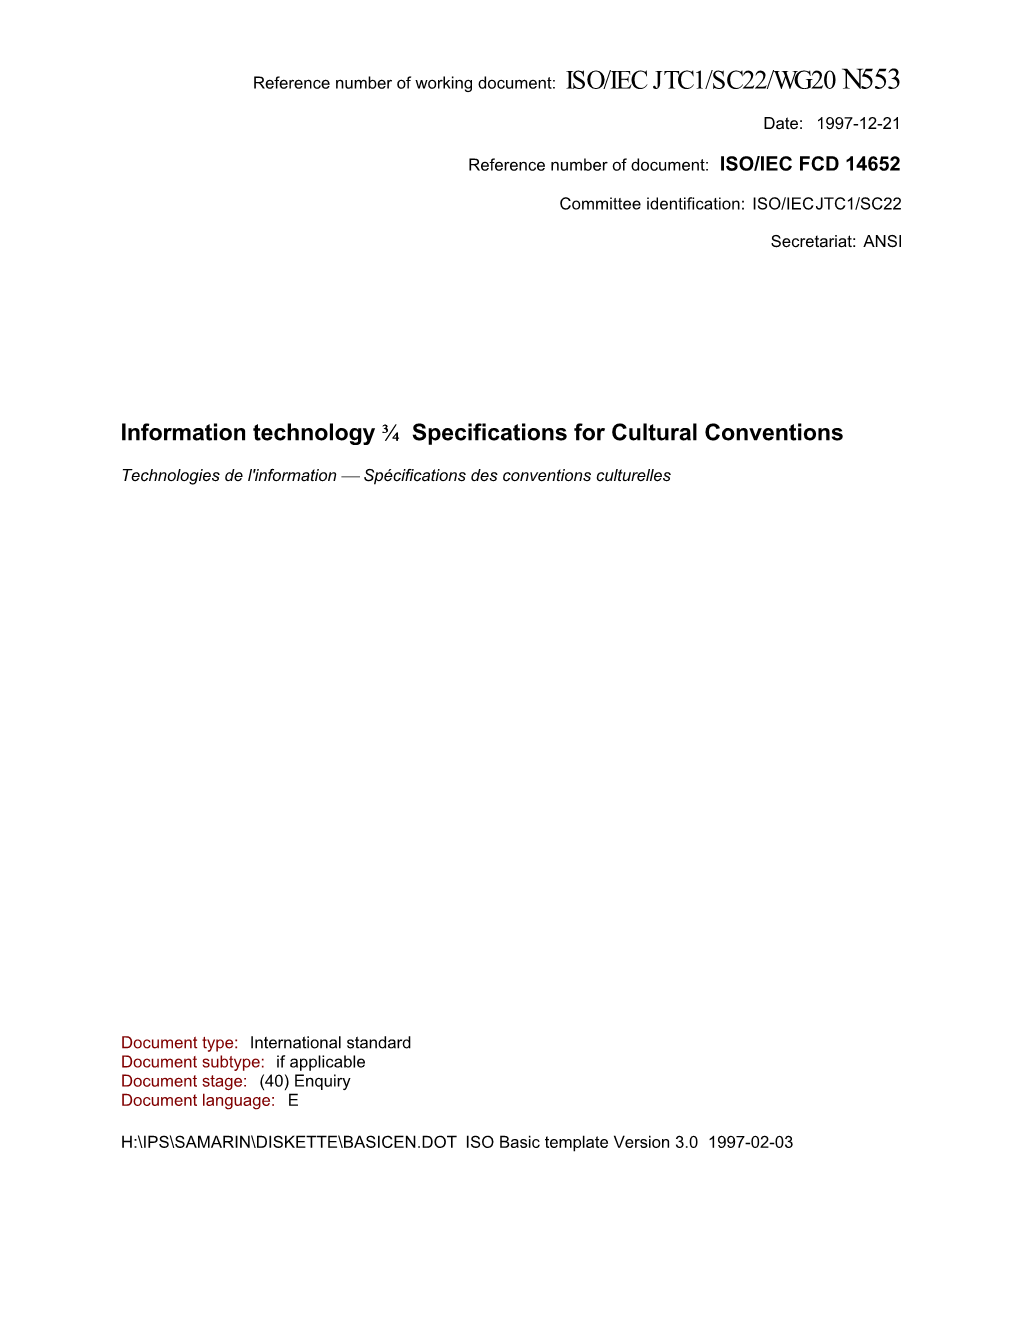 Information Technology Specifications for Cultural Conventions